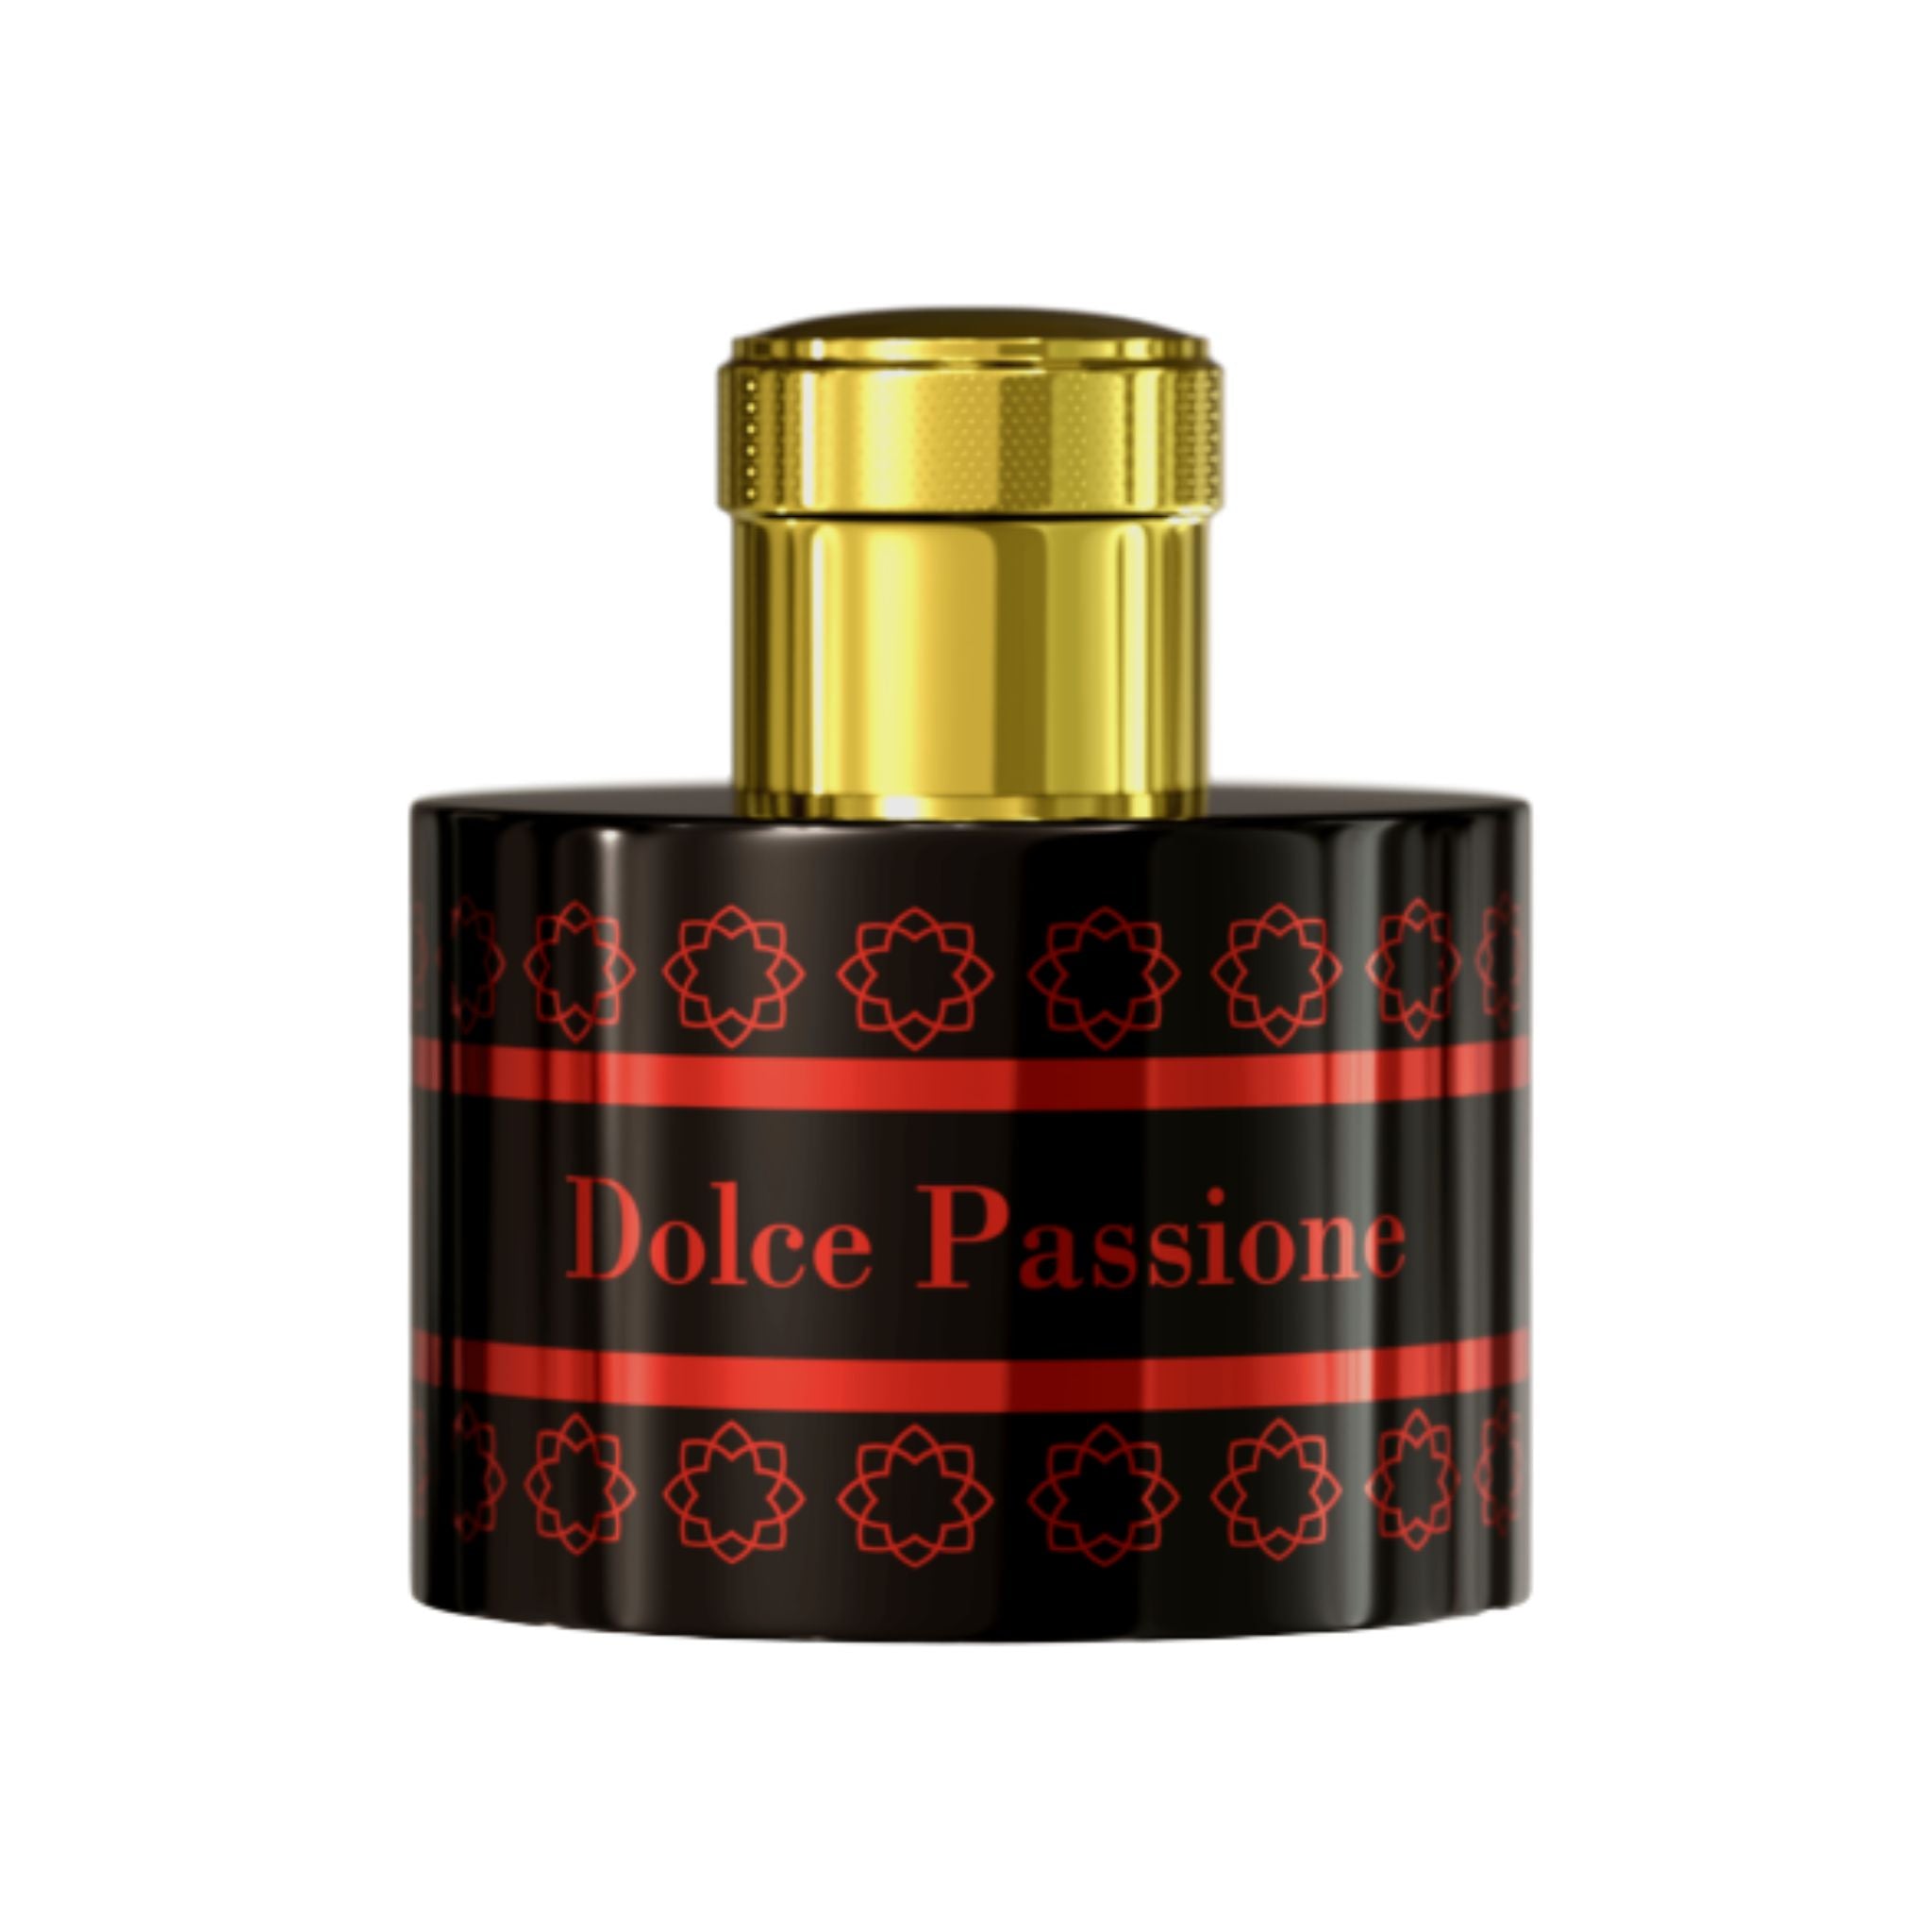 dolce passione perfume